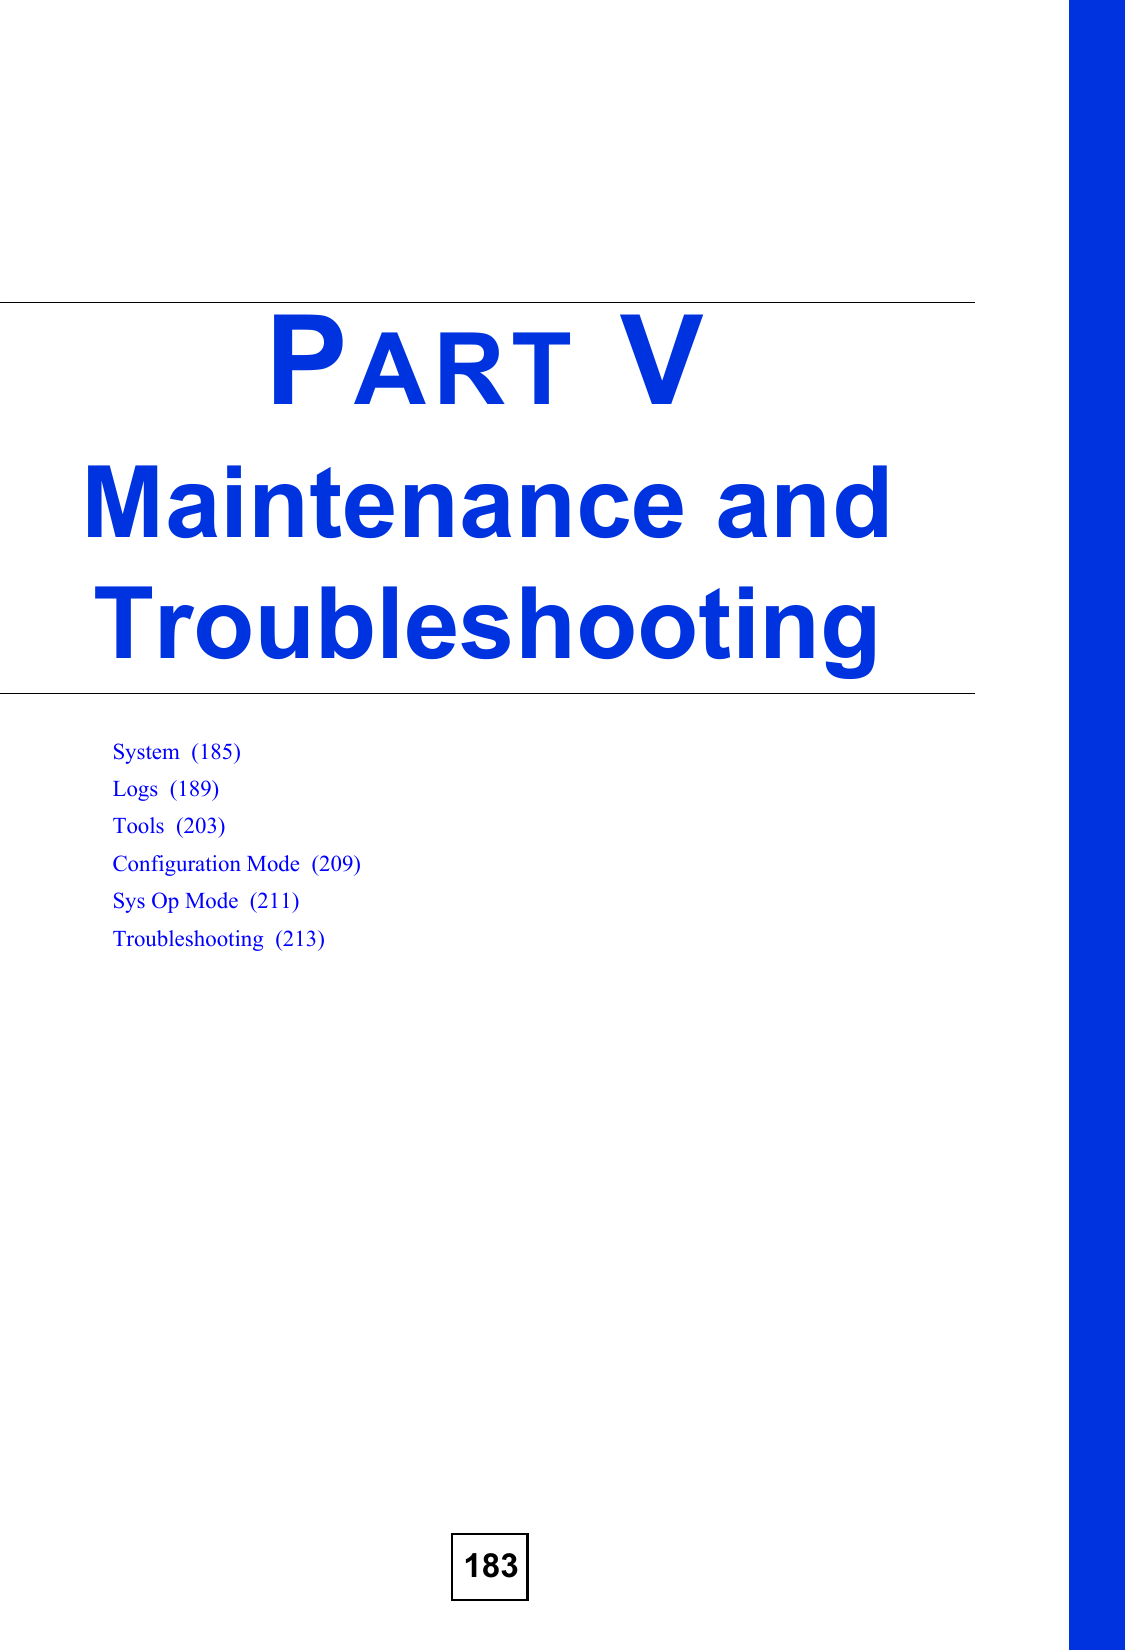 183PART VMaintenance and TroubleshootingSystem  (185)Logs  (189)Tools  (203)Configuration Mode  (209)Sys Op Mode  (211)Troubleshooting  (213)